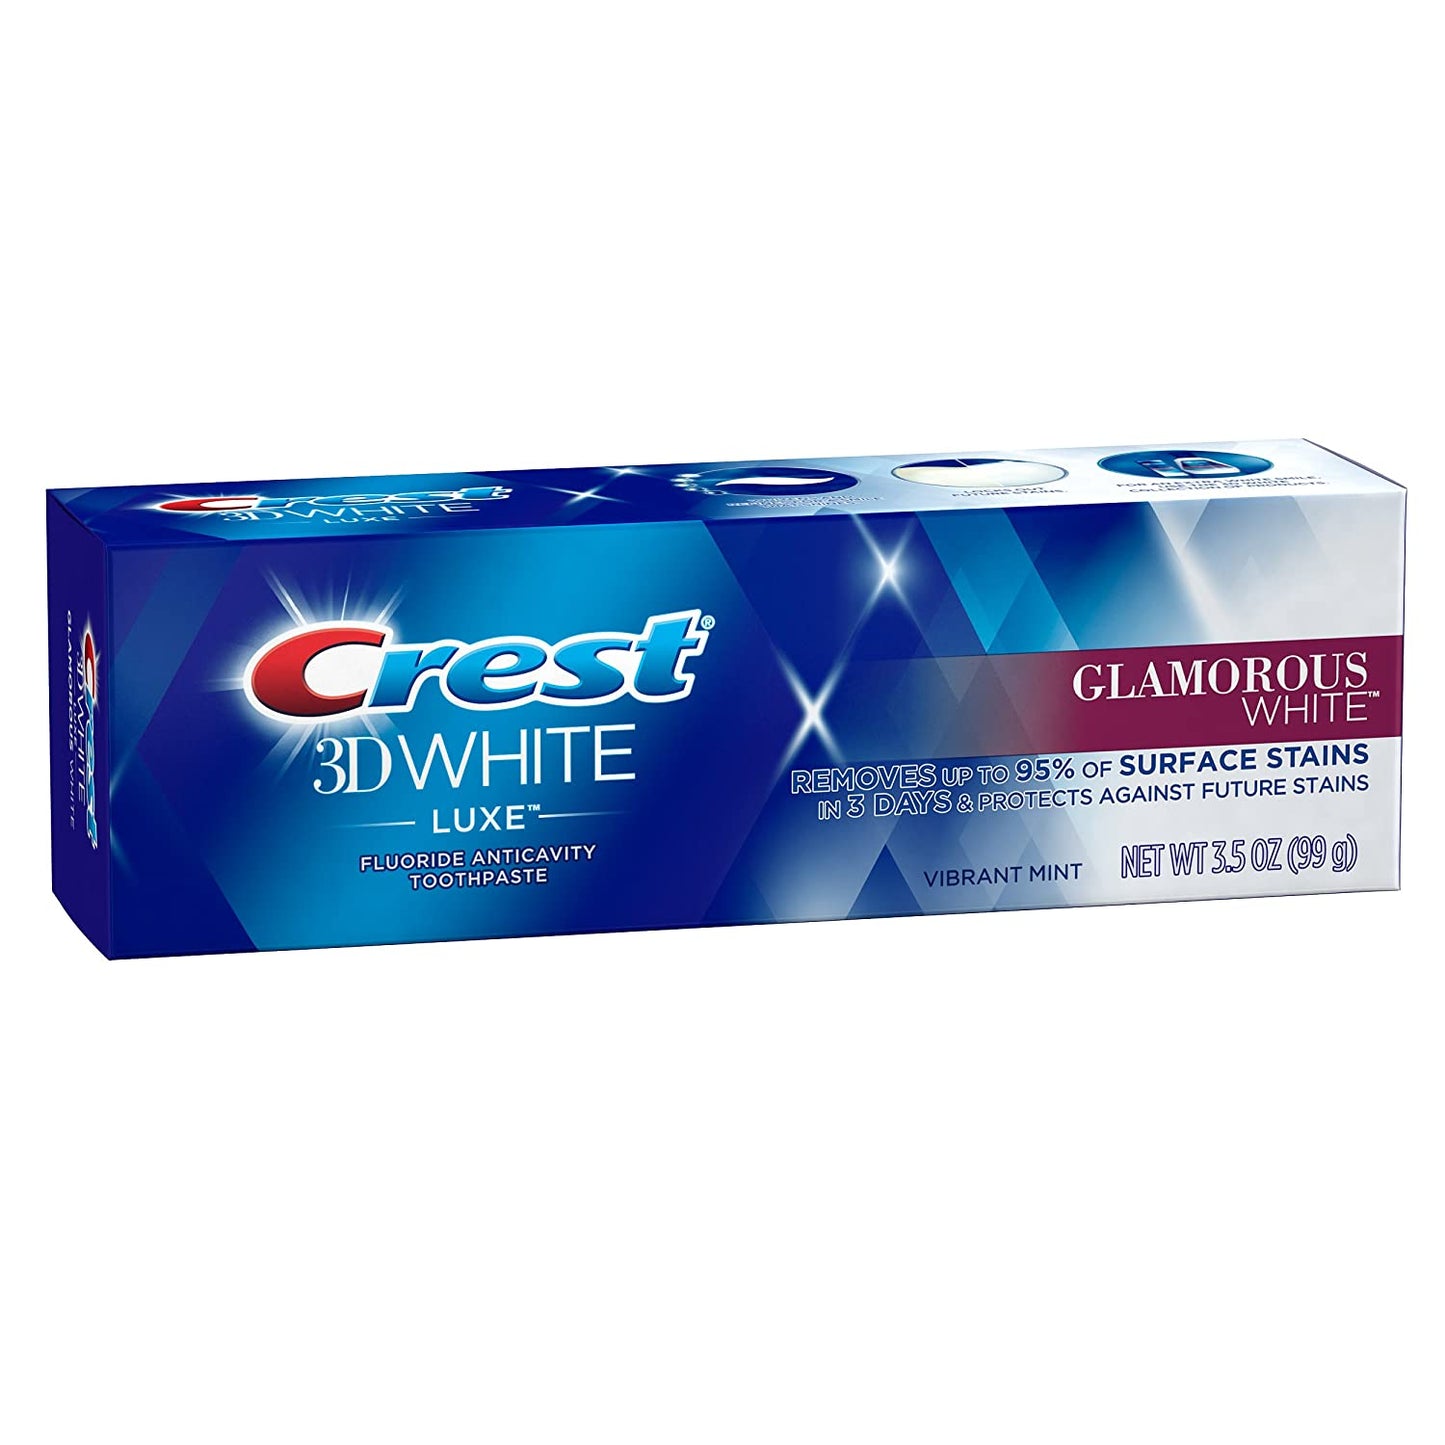 Crest 3d White Luxe Glamorous White Toothpaste 3 Pack